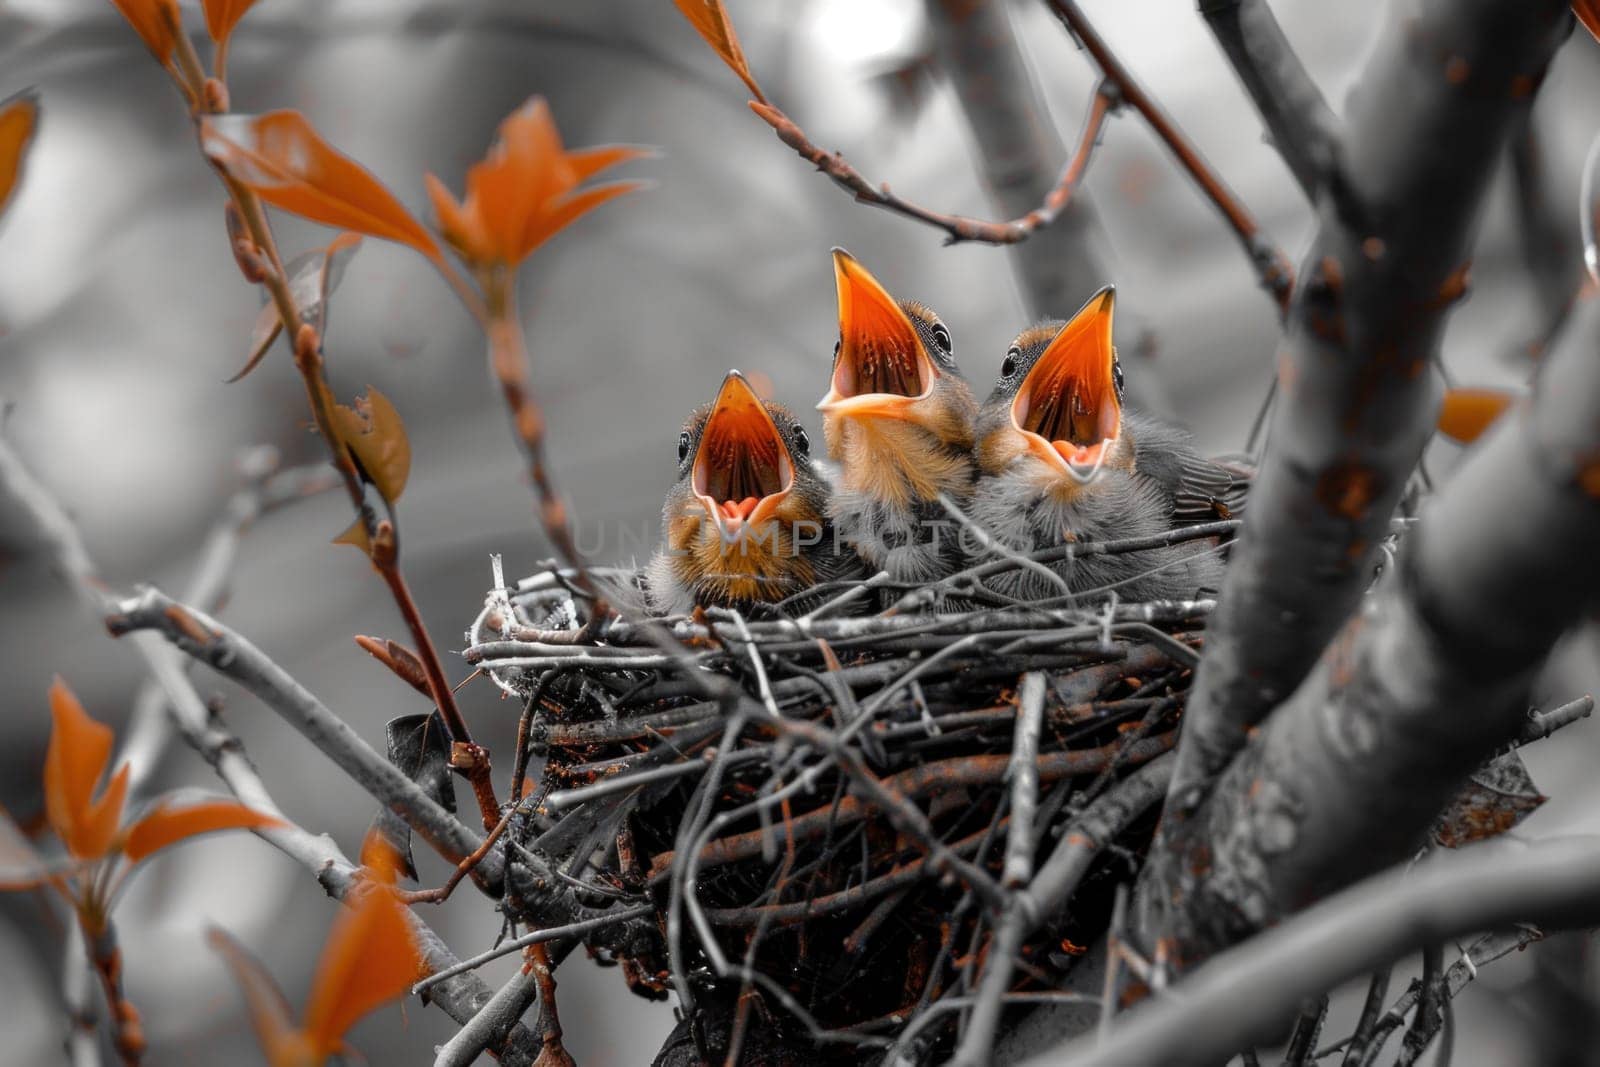 Three baby birds are sitting in a nest, one of which is eating by golfmerrymaker